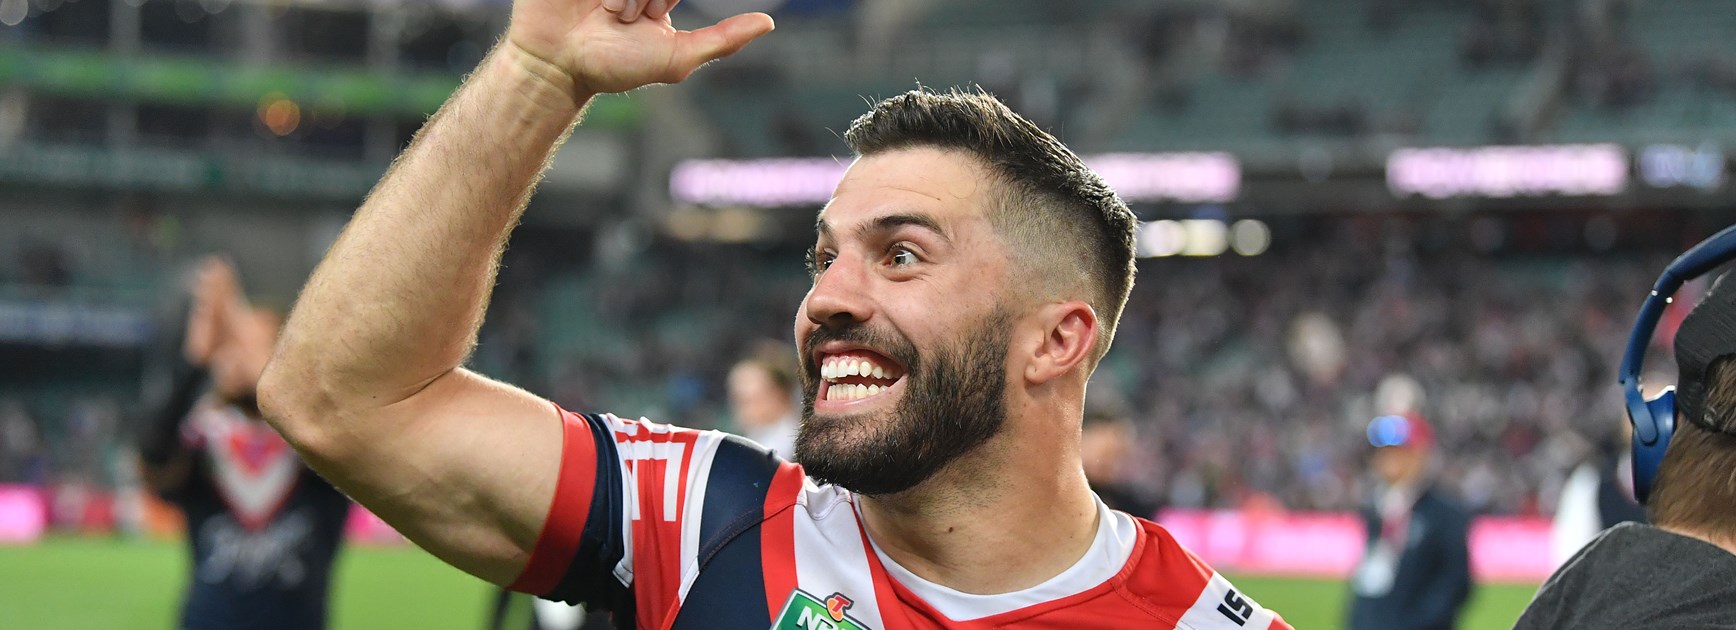 Soward's Power Rankings: Roosters finish on top